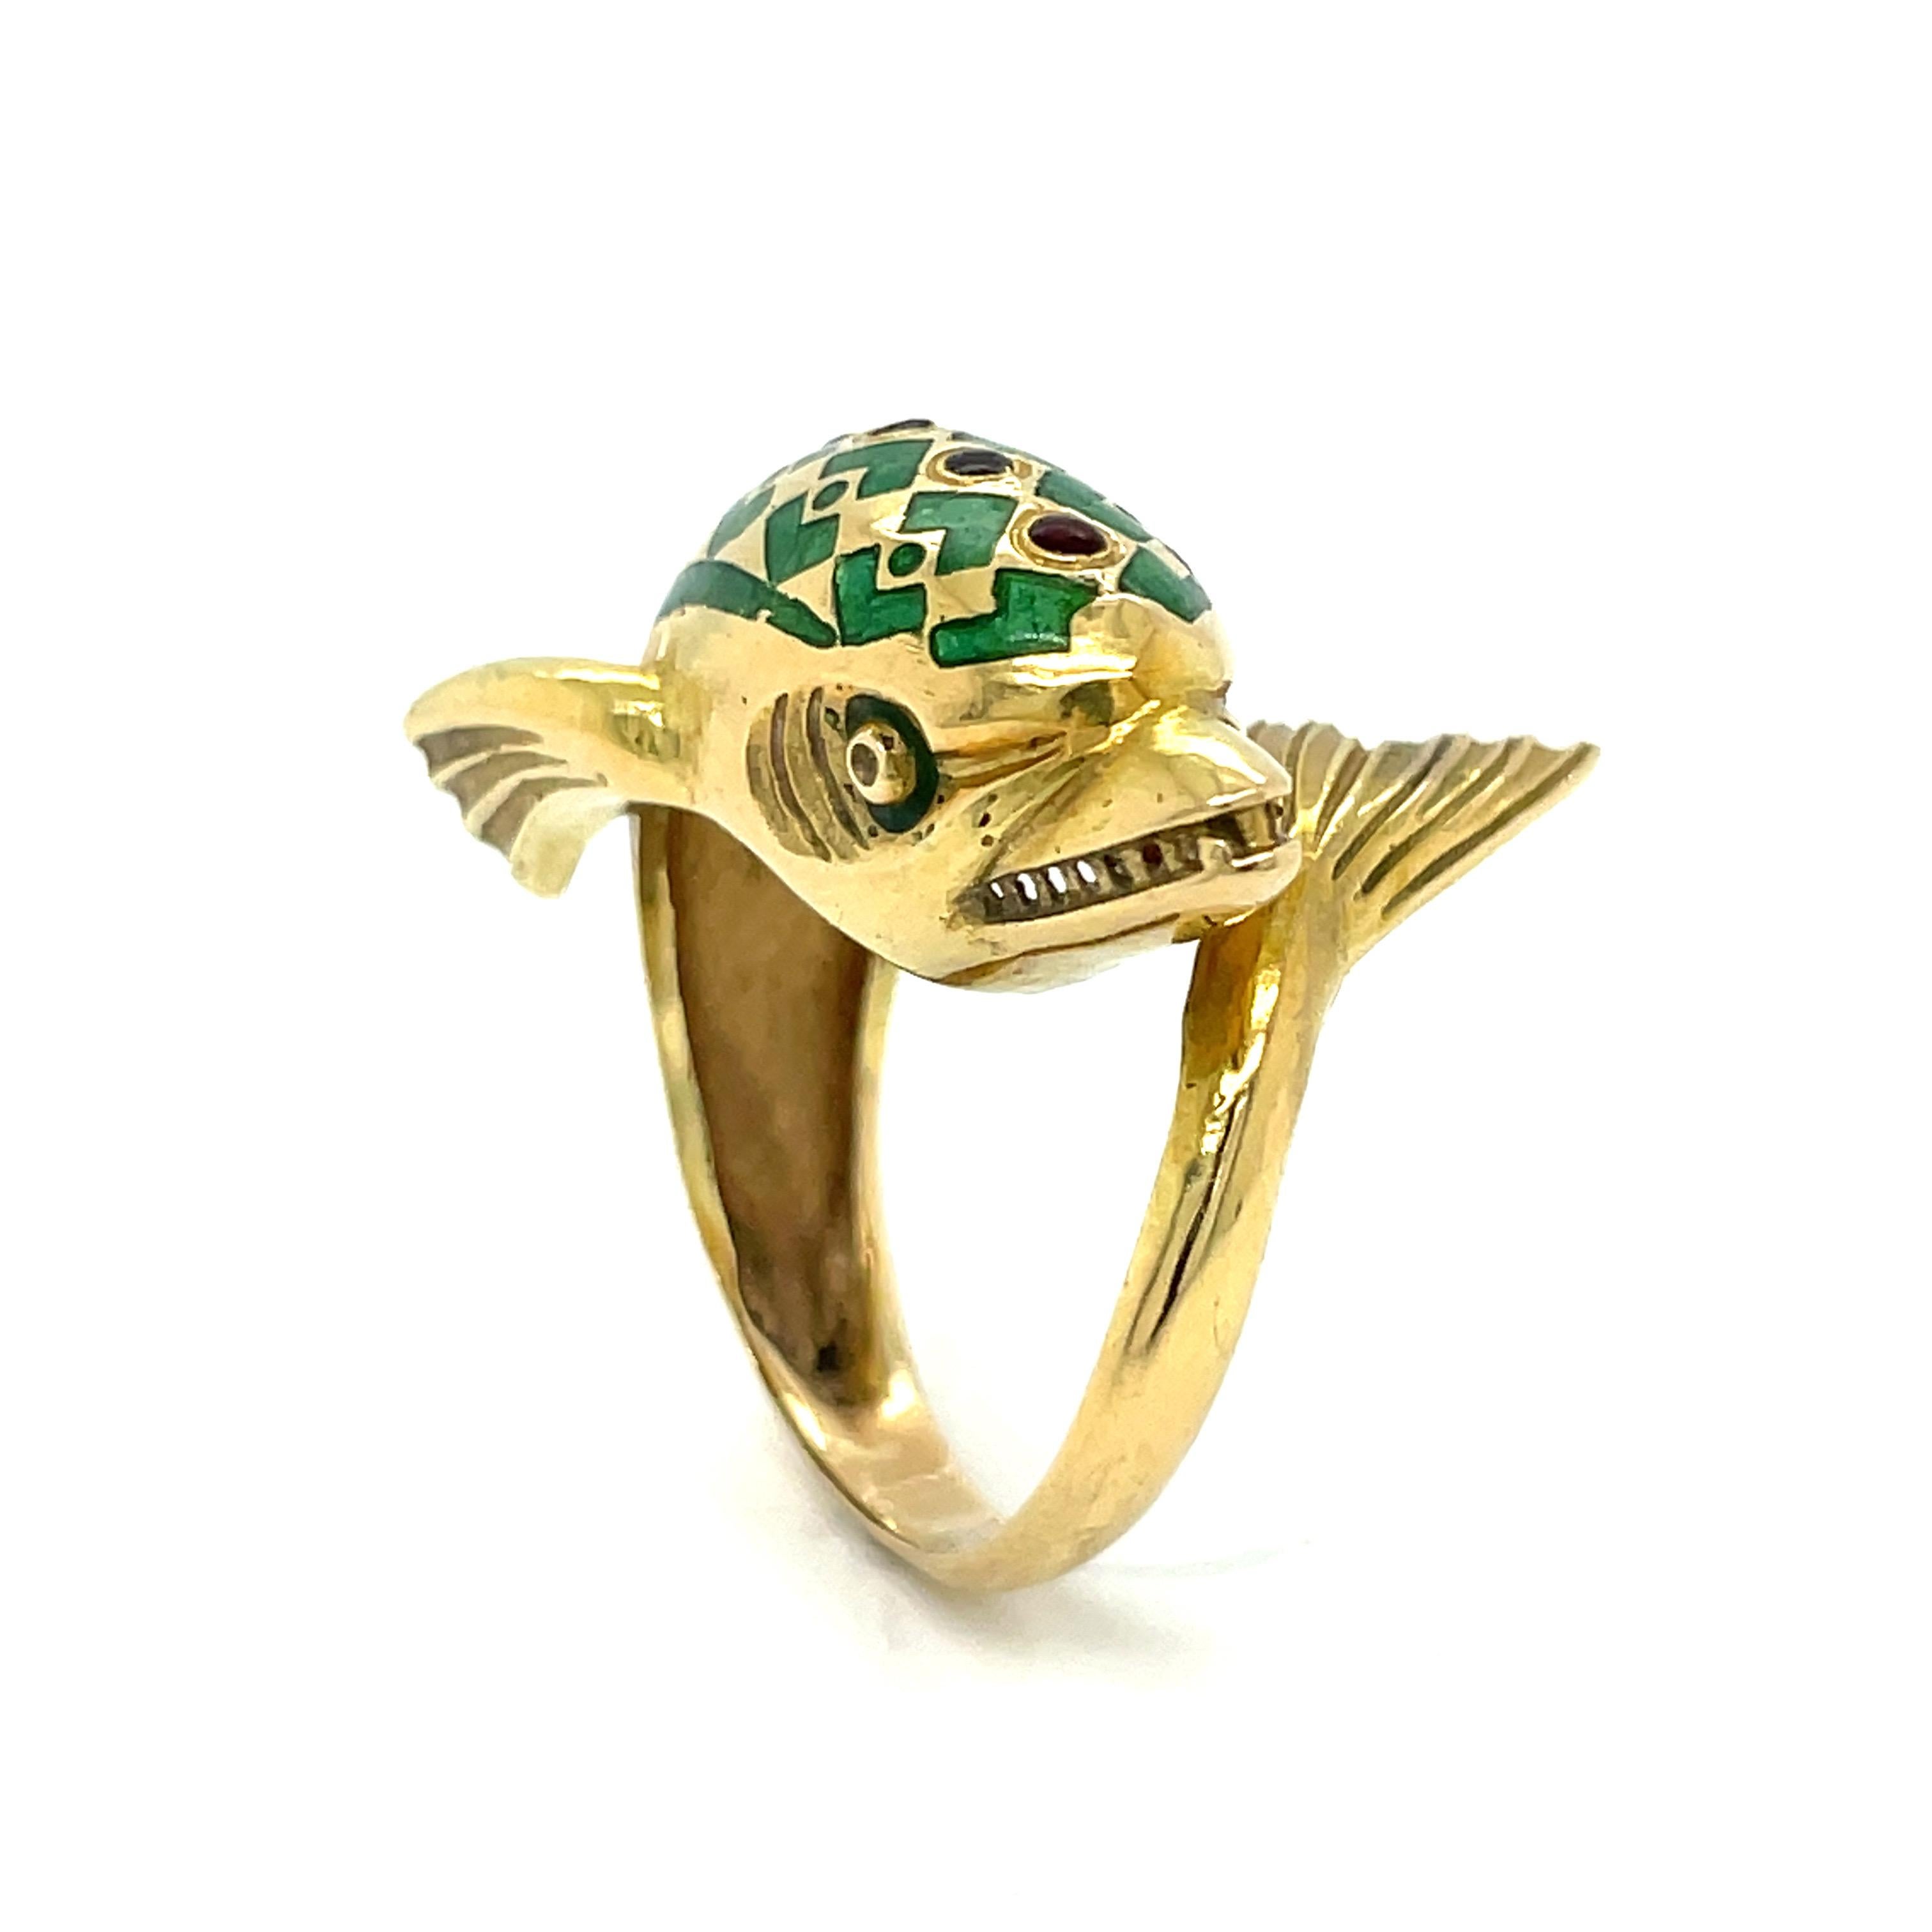 This magnificent vintage dolphin ring is a stunning one of a kind must have for dolphin lovers. Featuring vibrant green enamel and 7.40 grams of 18k yellow gold. 
This ring is a size 6.25 US and can be sized.  

This ring is sold in estate condition